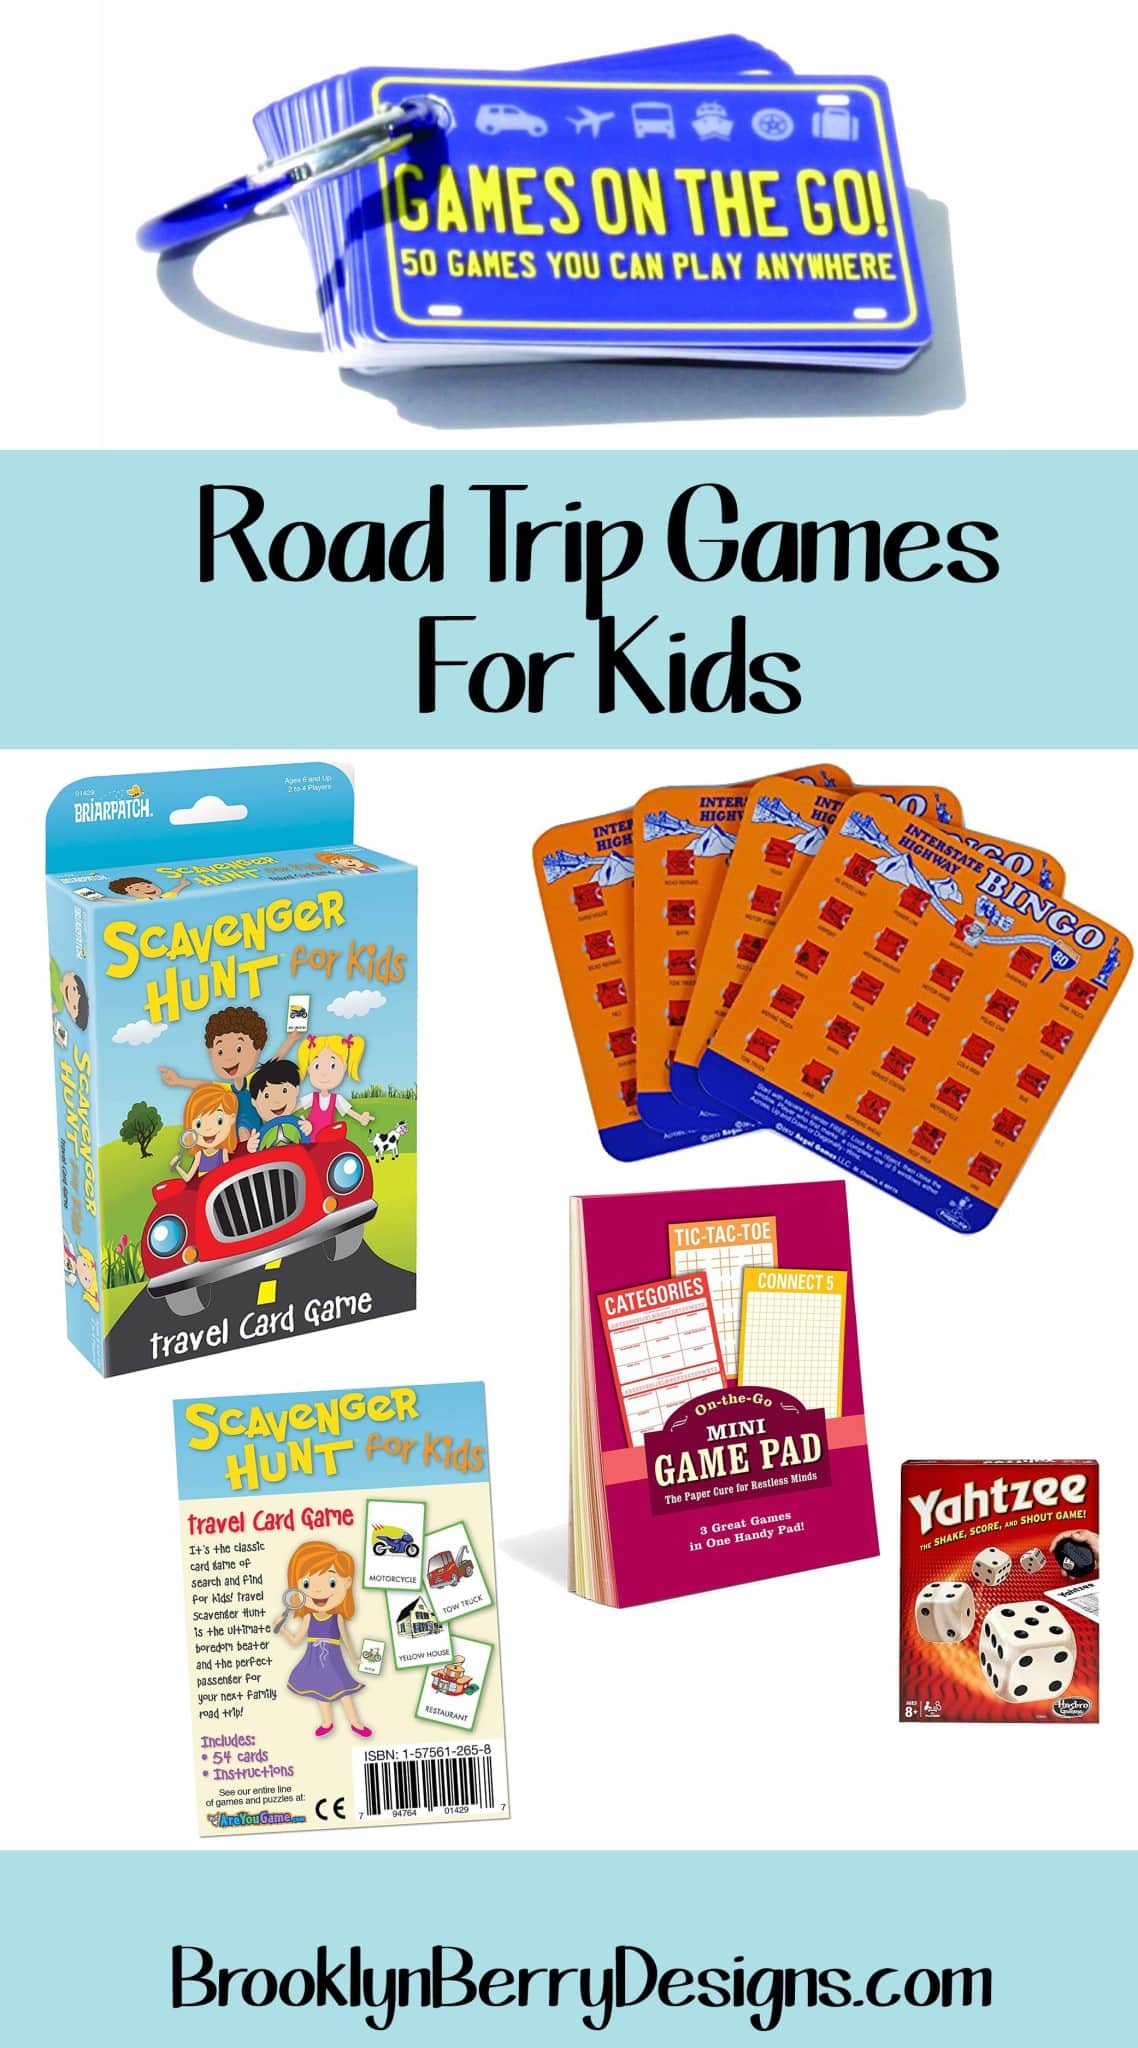 How do you keep kids entertained and happy on a family road trip - because you can only play I Spy for so long.  Here are my family's tried and tested recommended best travel games for kids. #familytravel #roadtrip #travelgames #roadtripgames #kidsgames via @brookeberry